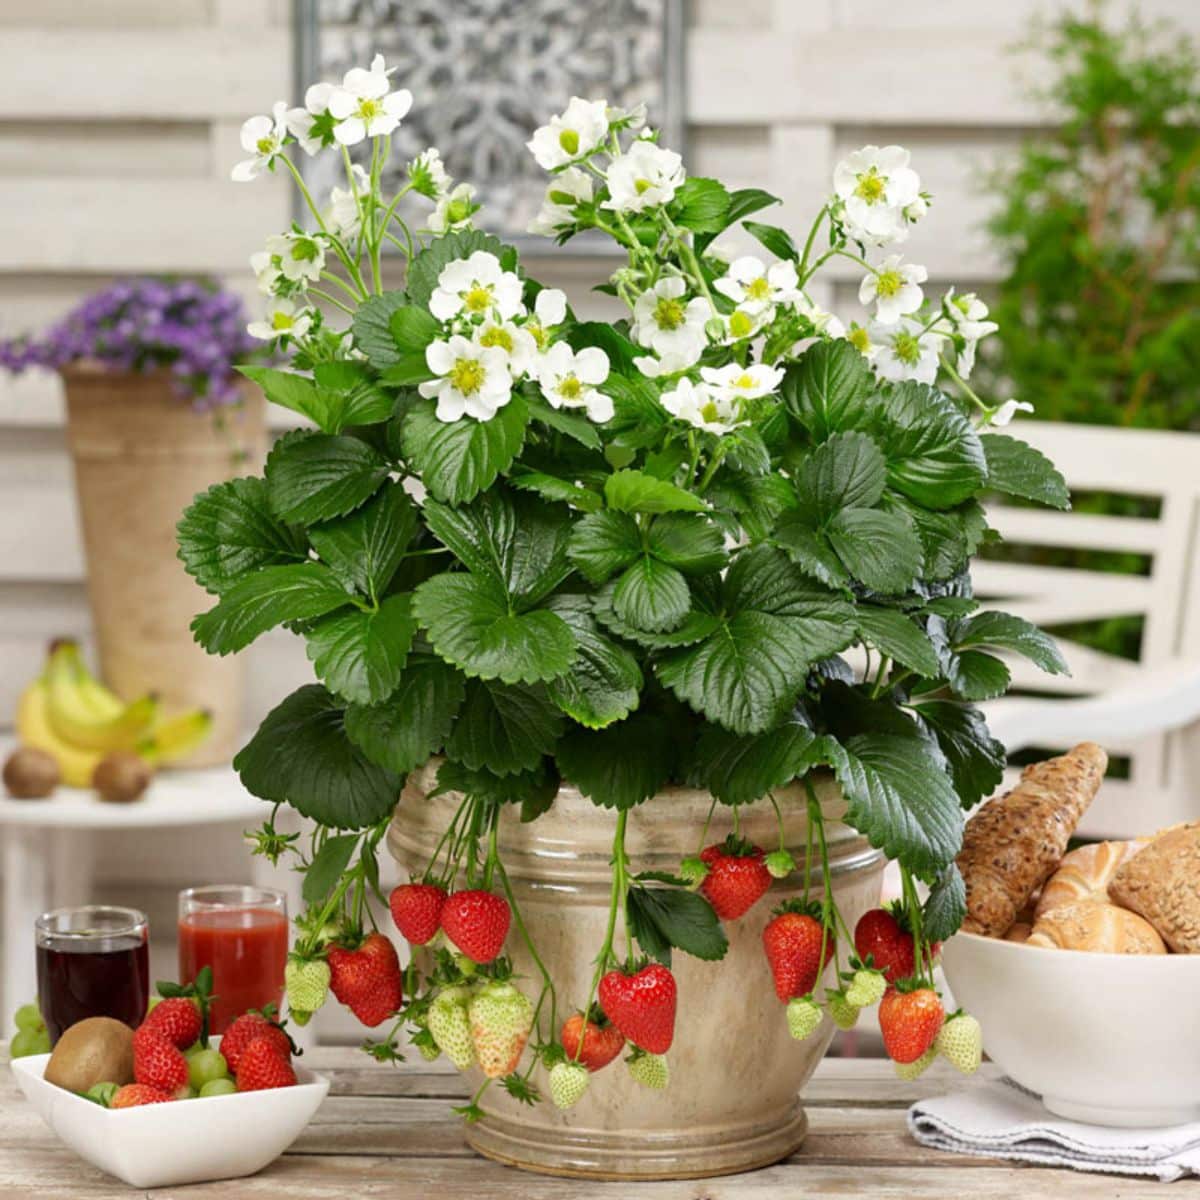 Montanta strawberry variety plant growing in a pot on a table with bowls of foods.